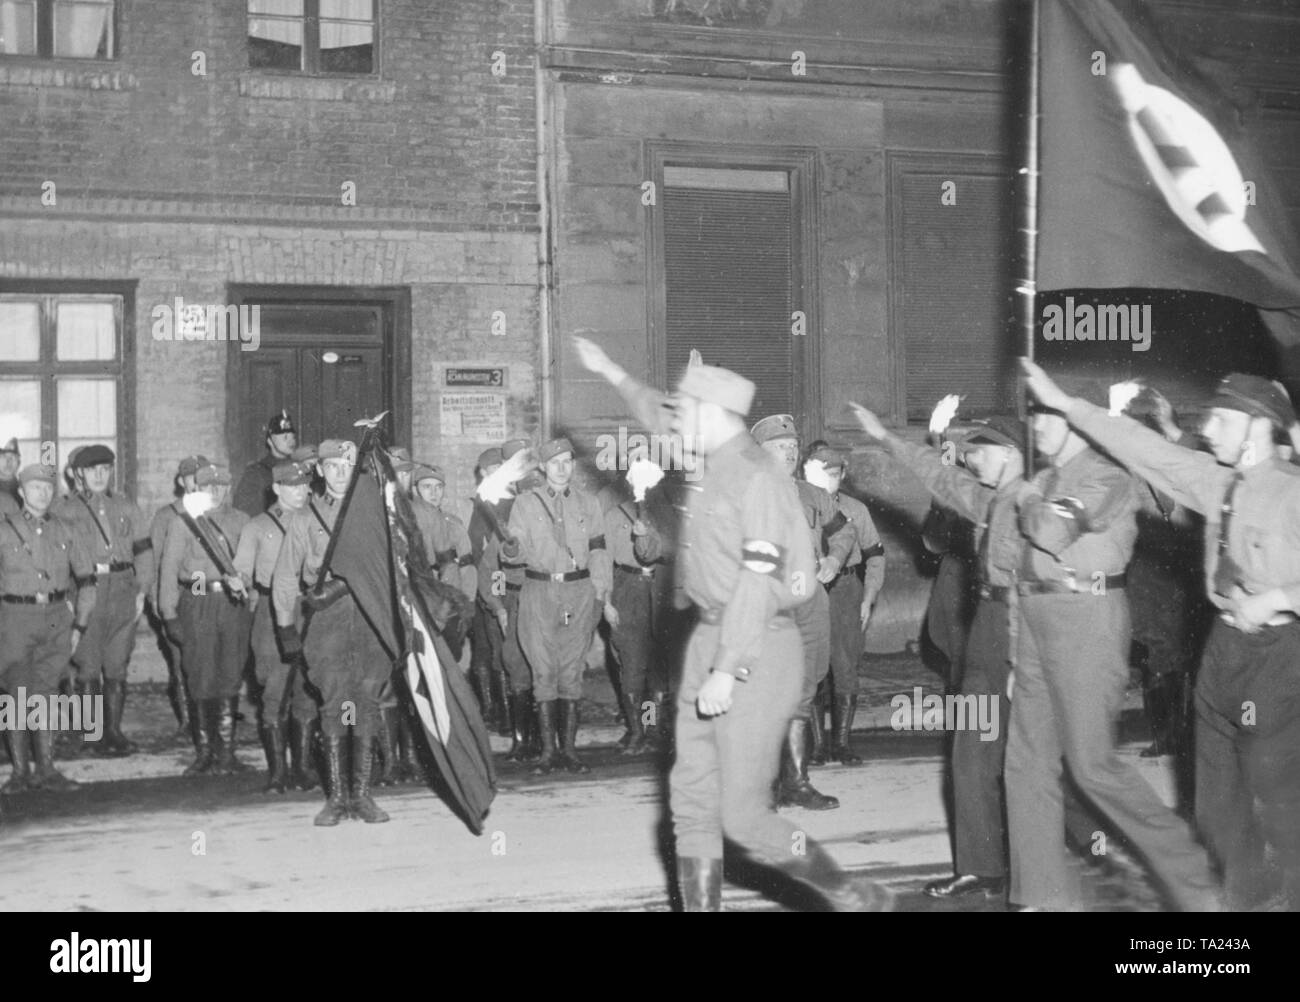 In the final phase of the Weimar Republic, SA men march through the streets of Berlin under the eyes of the police. On the wall of the house still hangs an election poster of the KPD. Stock Photo